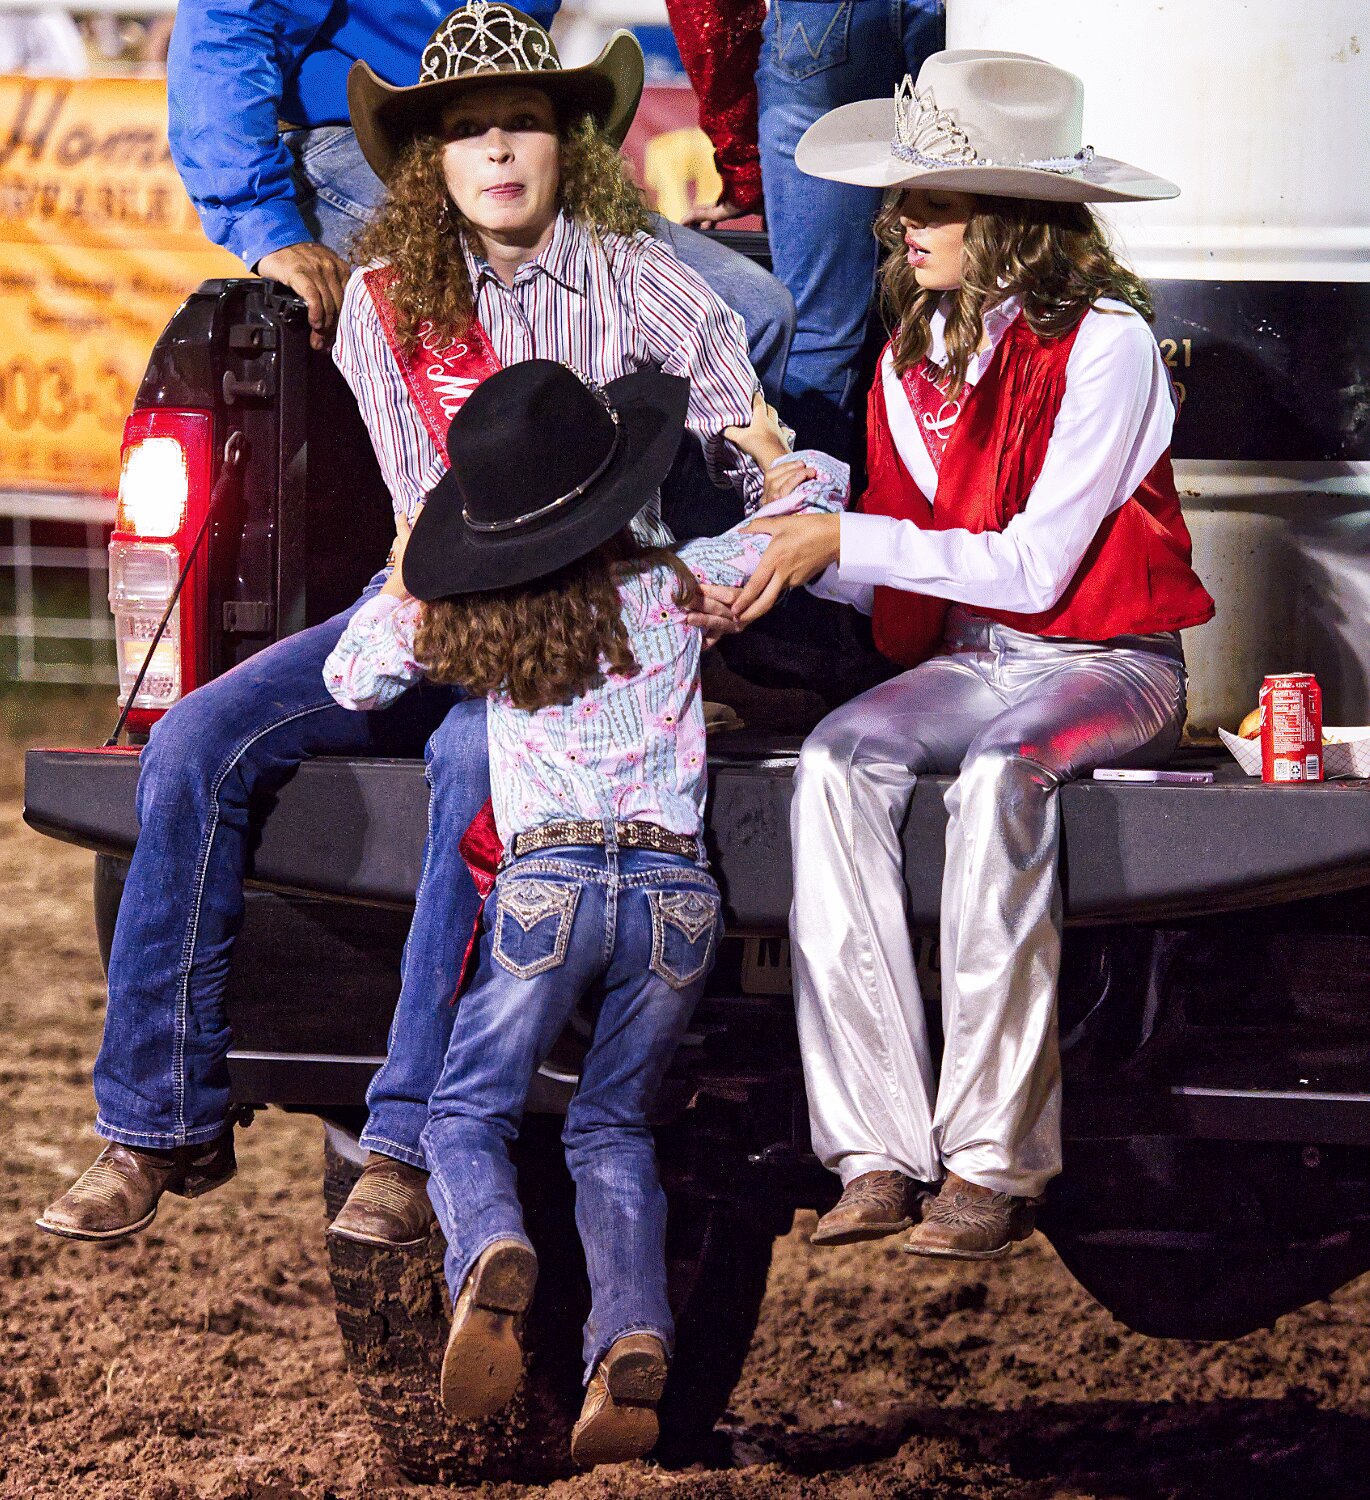 2022 royalty helped make adjustments to the racing barrels in between the senior and junior divisions. Miss MFDR Mikayla Mitchell and Jr. Miss MFDR Kaetynn Santellan help Little Miss MFDR Layla Carrell back into the pickup bed. [see more sights and MFDR 2023 rodeo action]